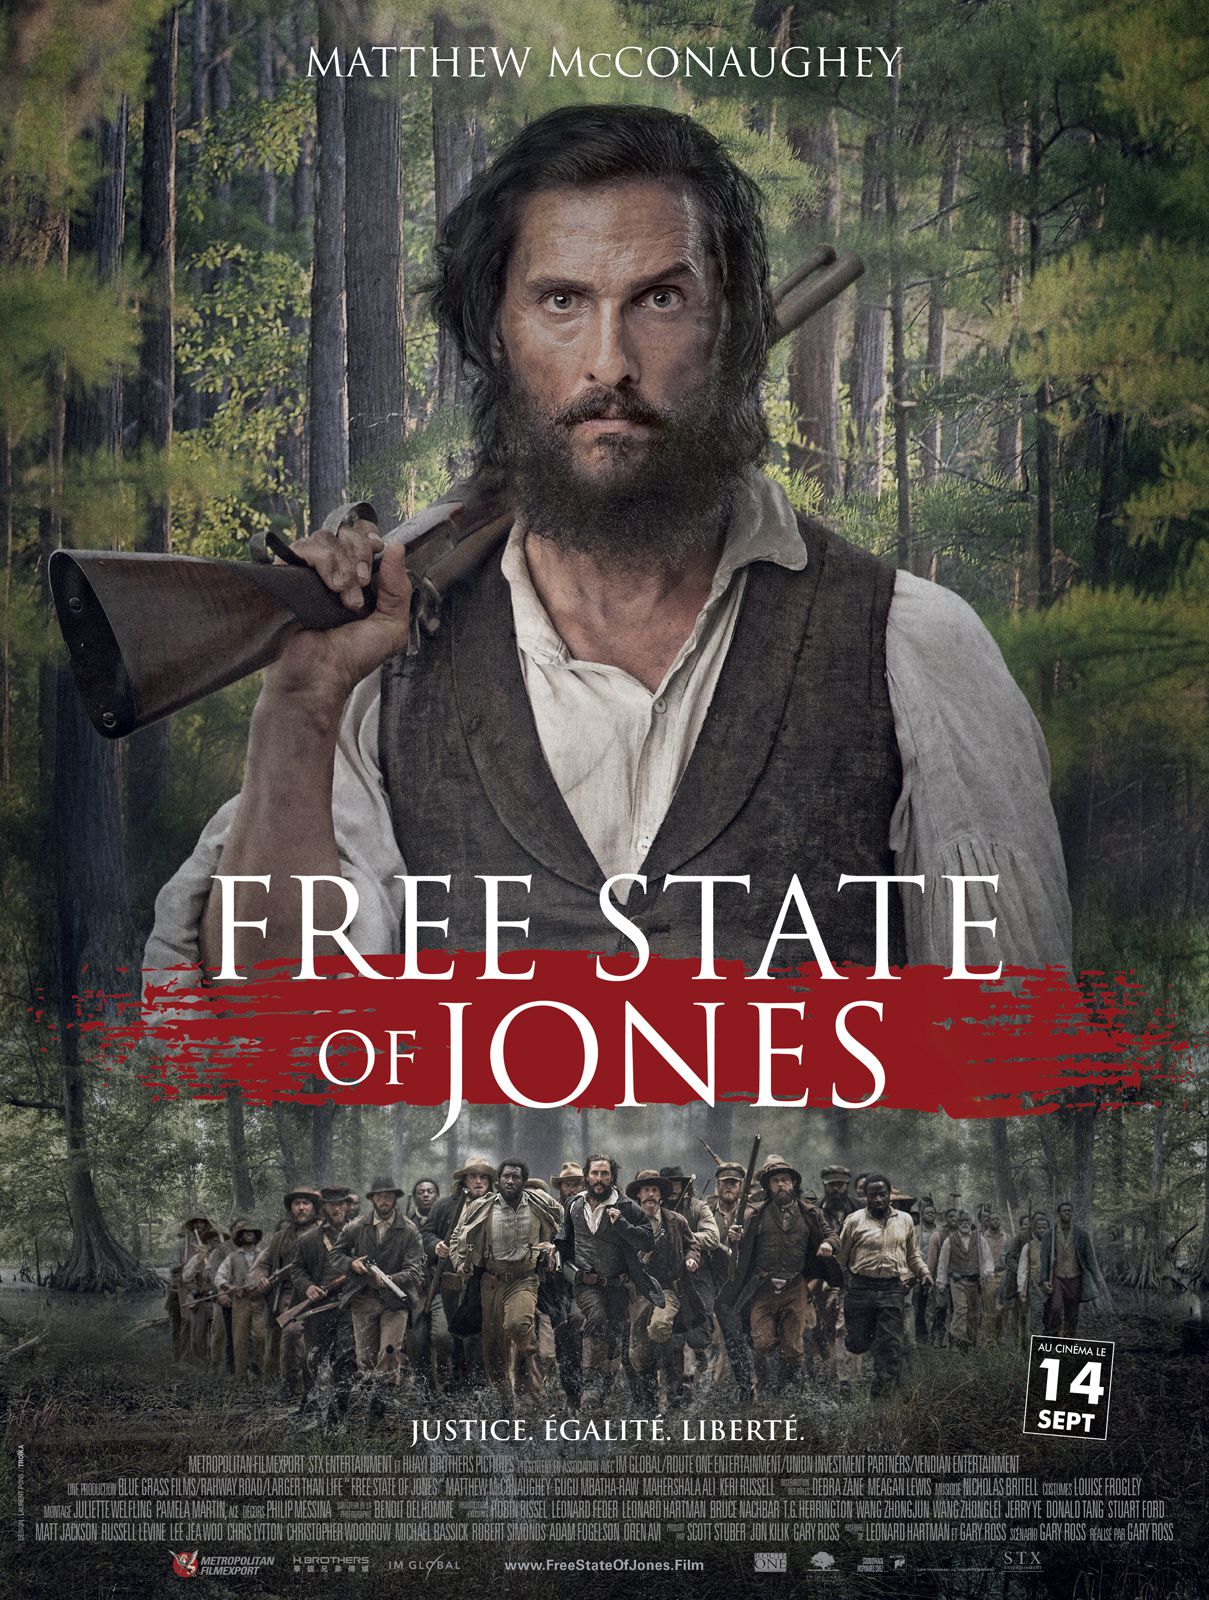 Free State of Jones - Film (2016) streaming VF gratuit complet